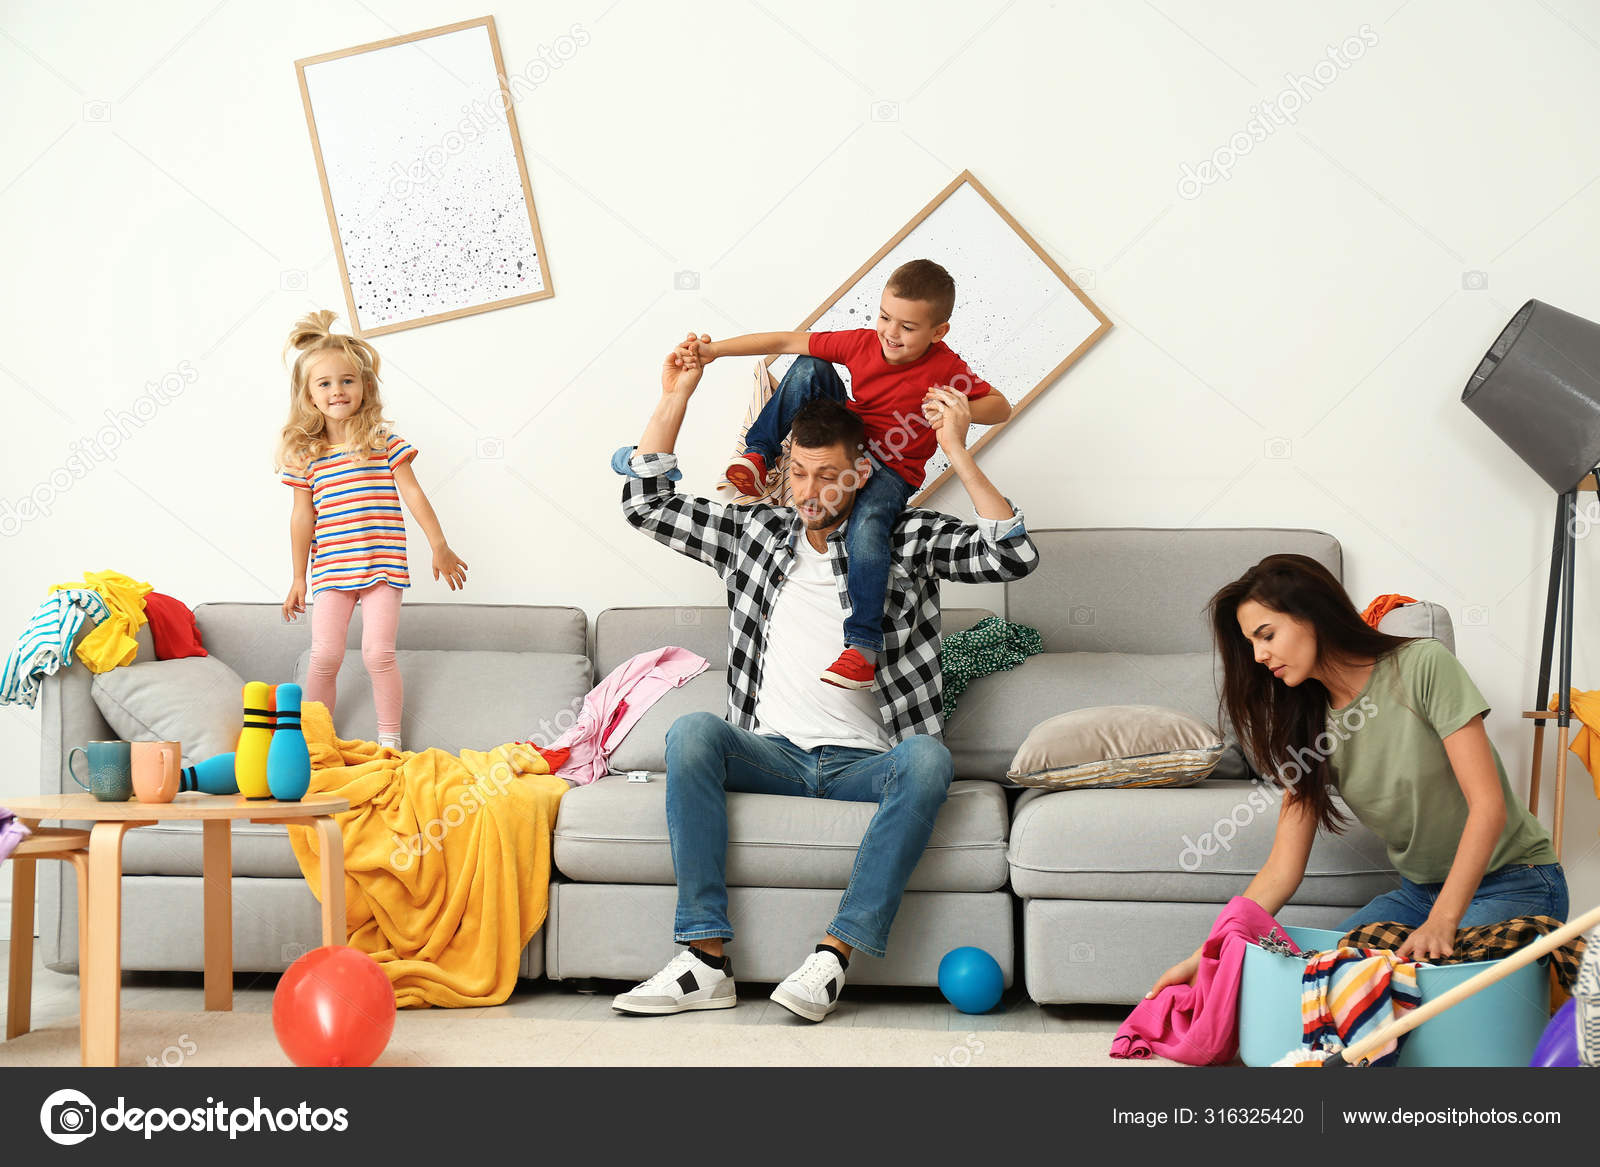 Clean up the mess. Housework Kids фотообои. Messy Family. Children at Home a mess. Making a mess.